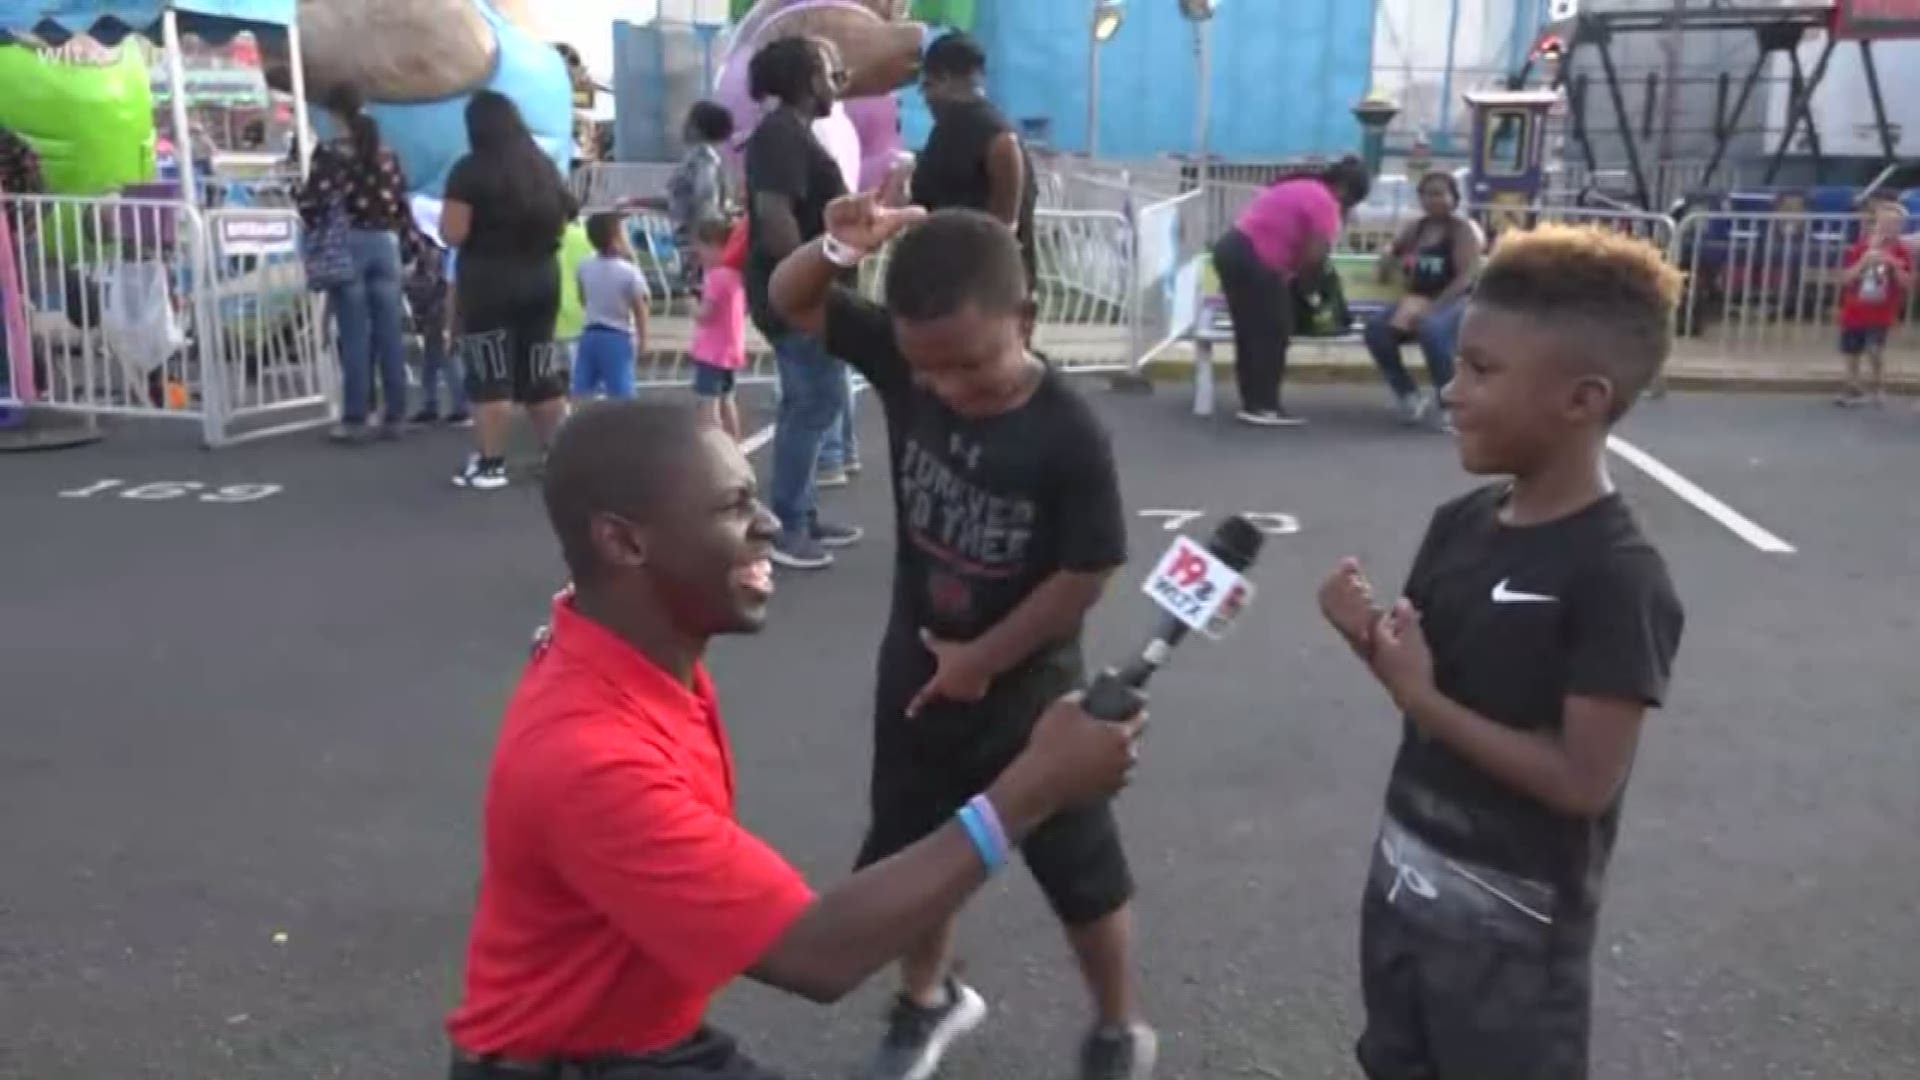 Michael Fuller found two young gentleman who wanted to show off their moves.